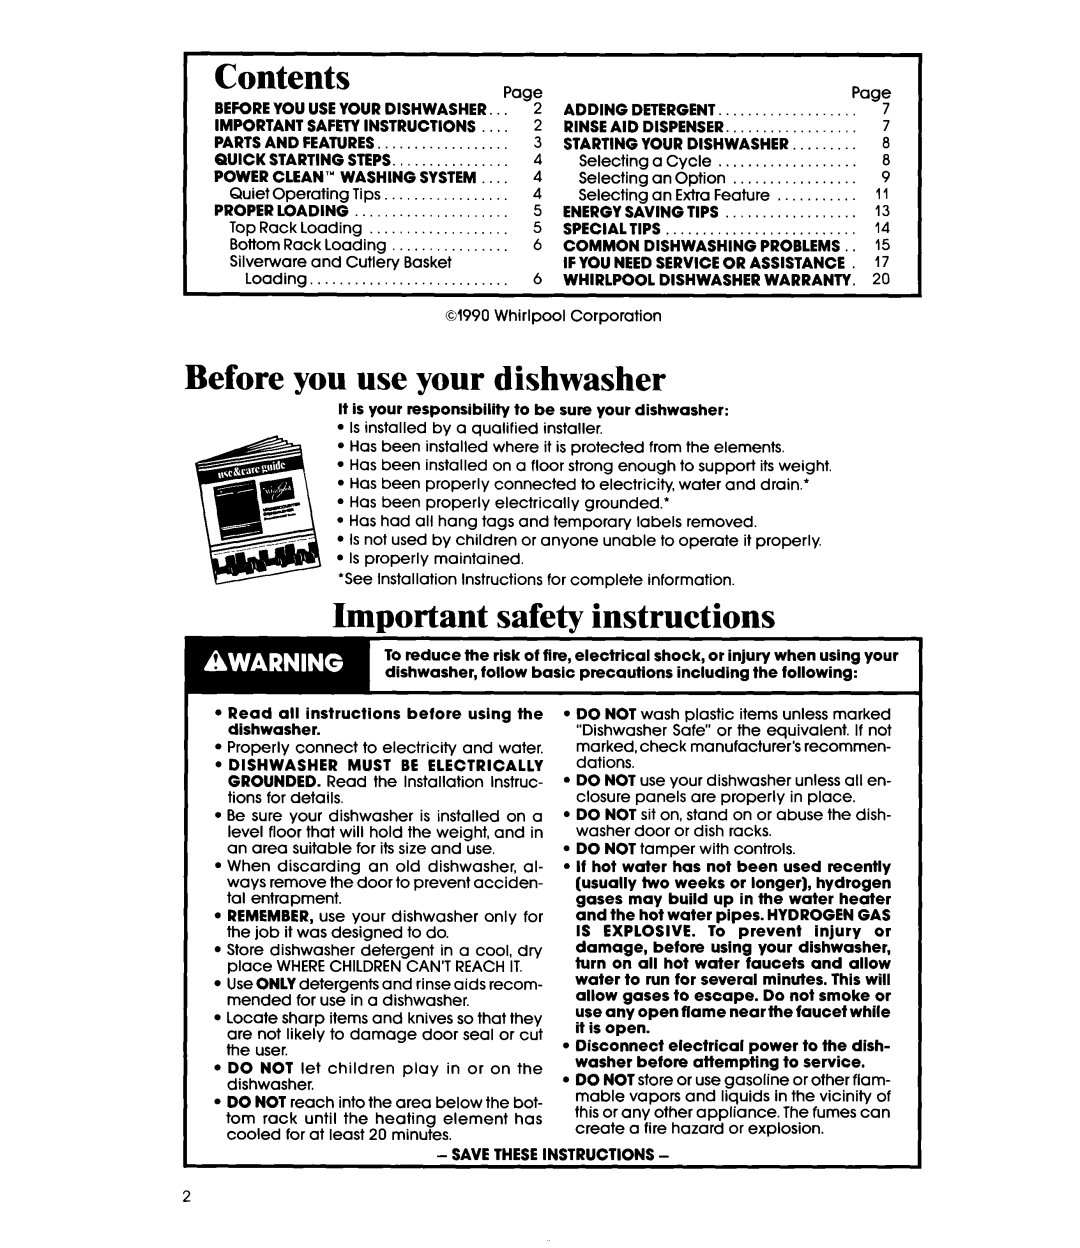 Whirlpool DU9450XT manual Contents, Before you use your dishwasher, safety instructions 